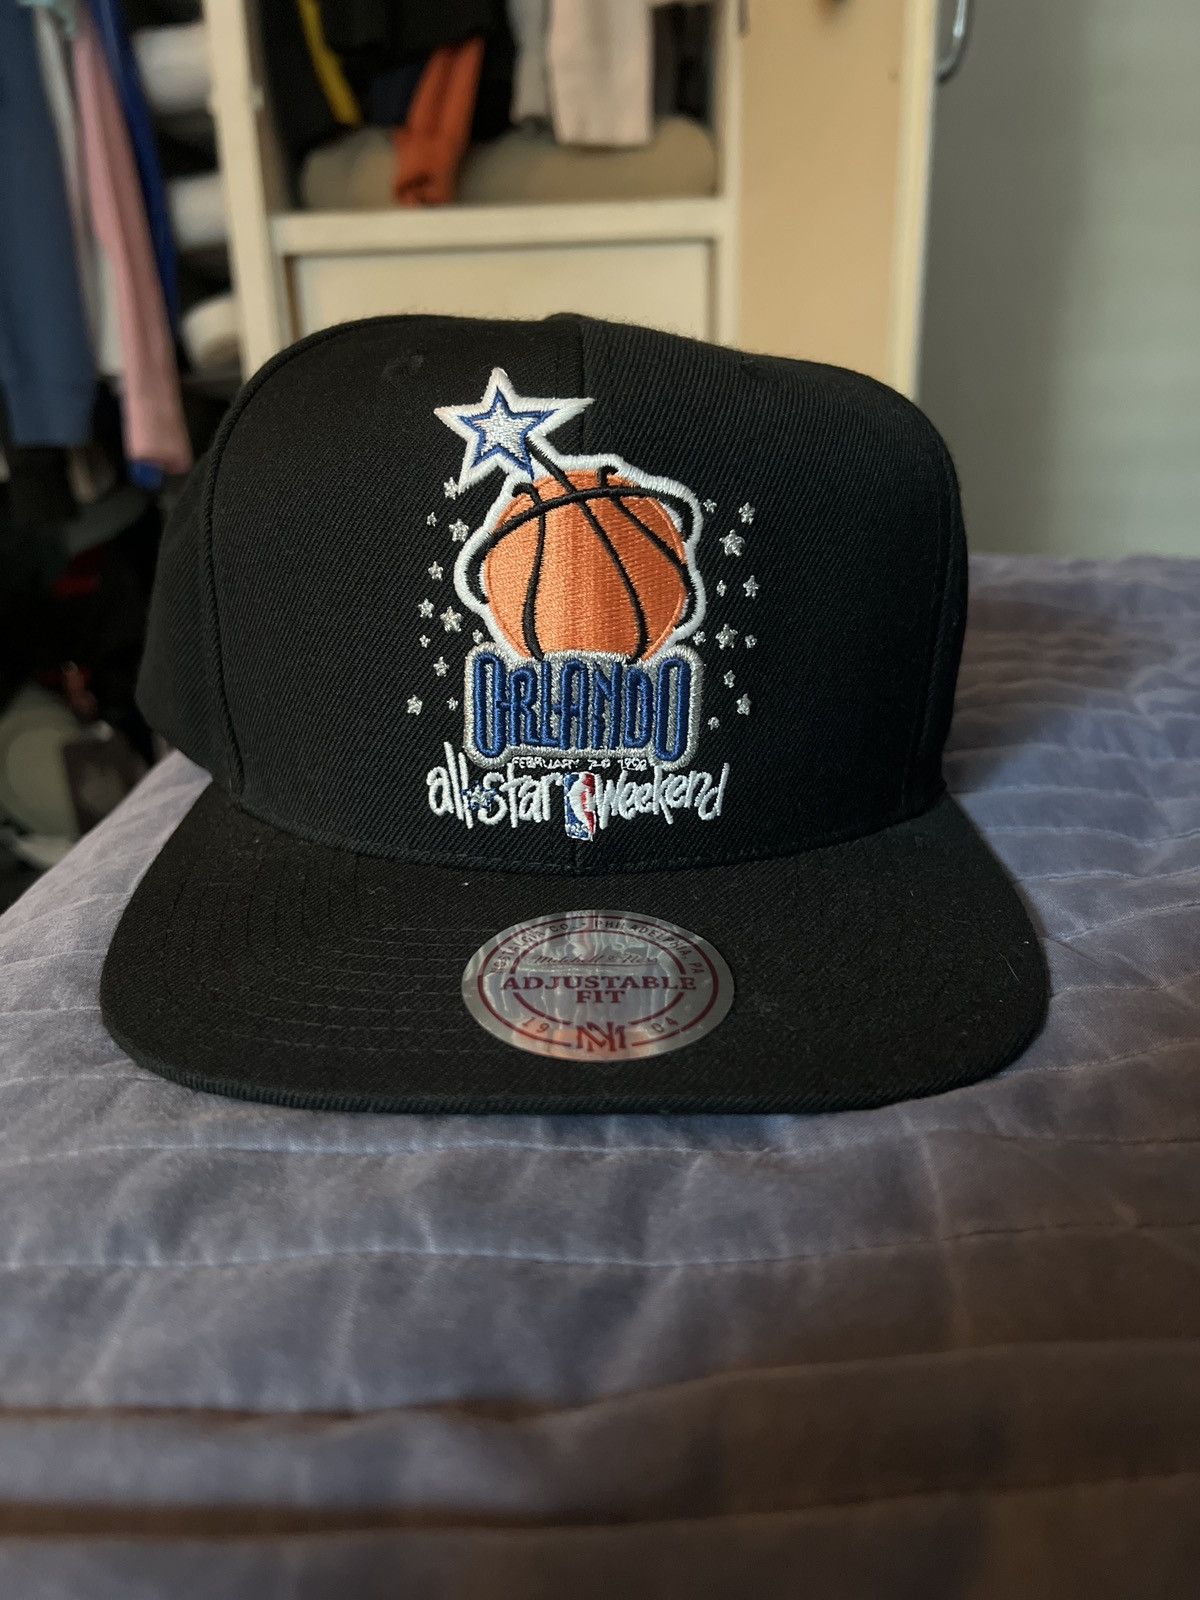 Mitchell & Ness Orlando All-Star weekend Mitchell and Ness hat | Grailed